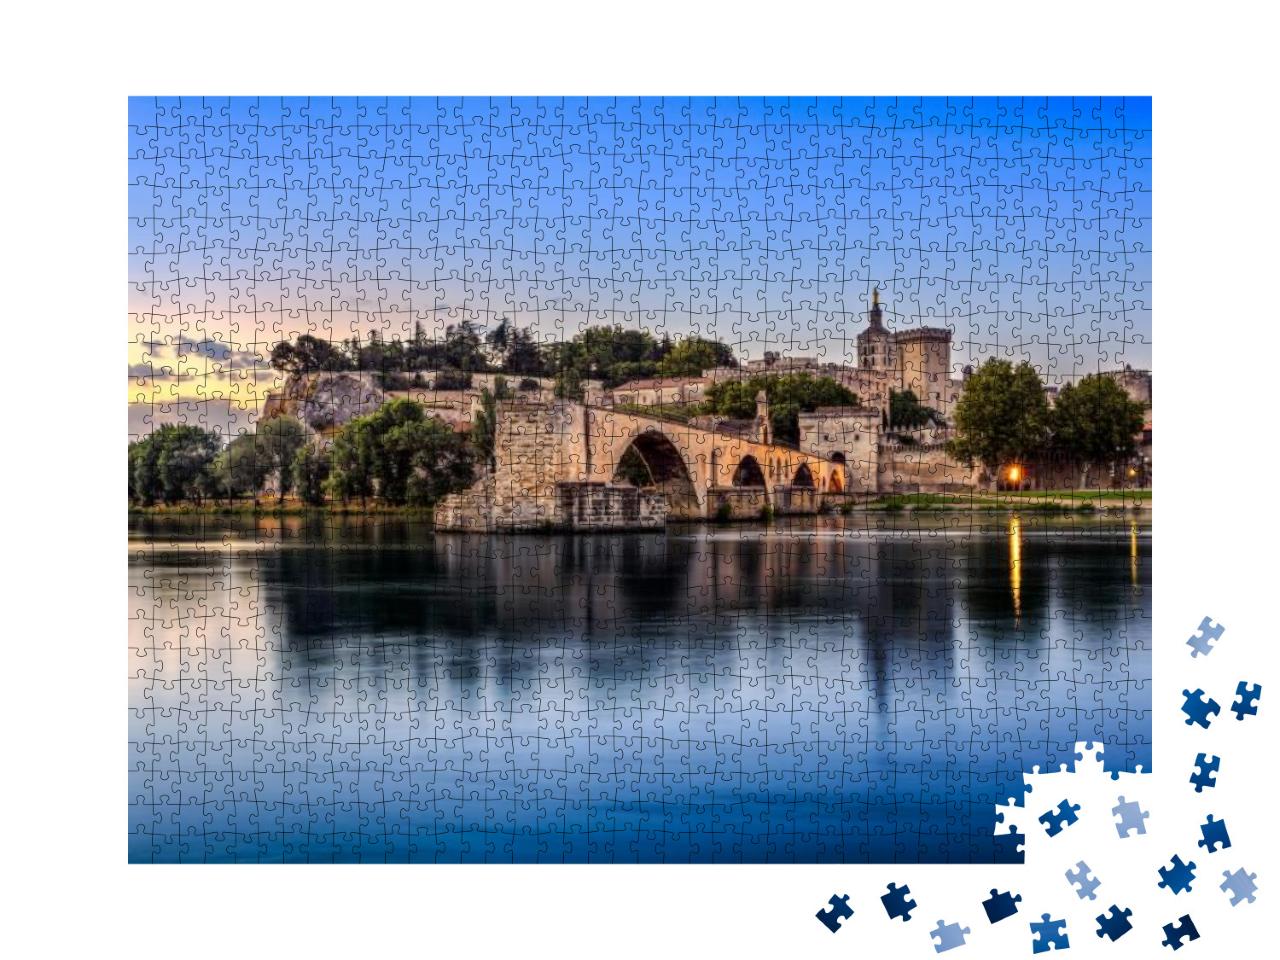 Avignon Bridge with Popes Palace & Rhone River At Sunrise... Jigsaw Puzzle with 1000 pieces